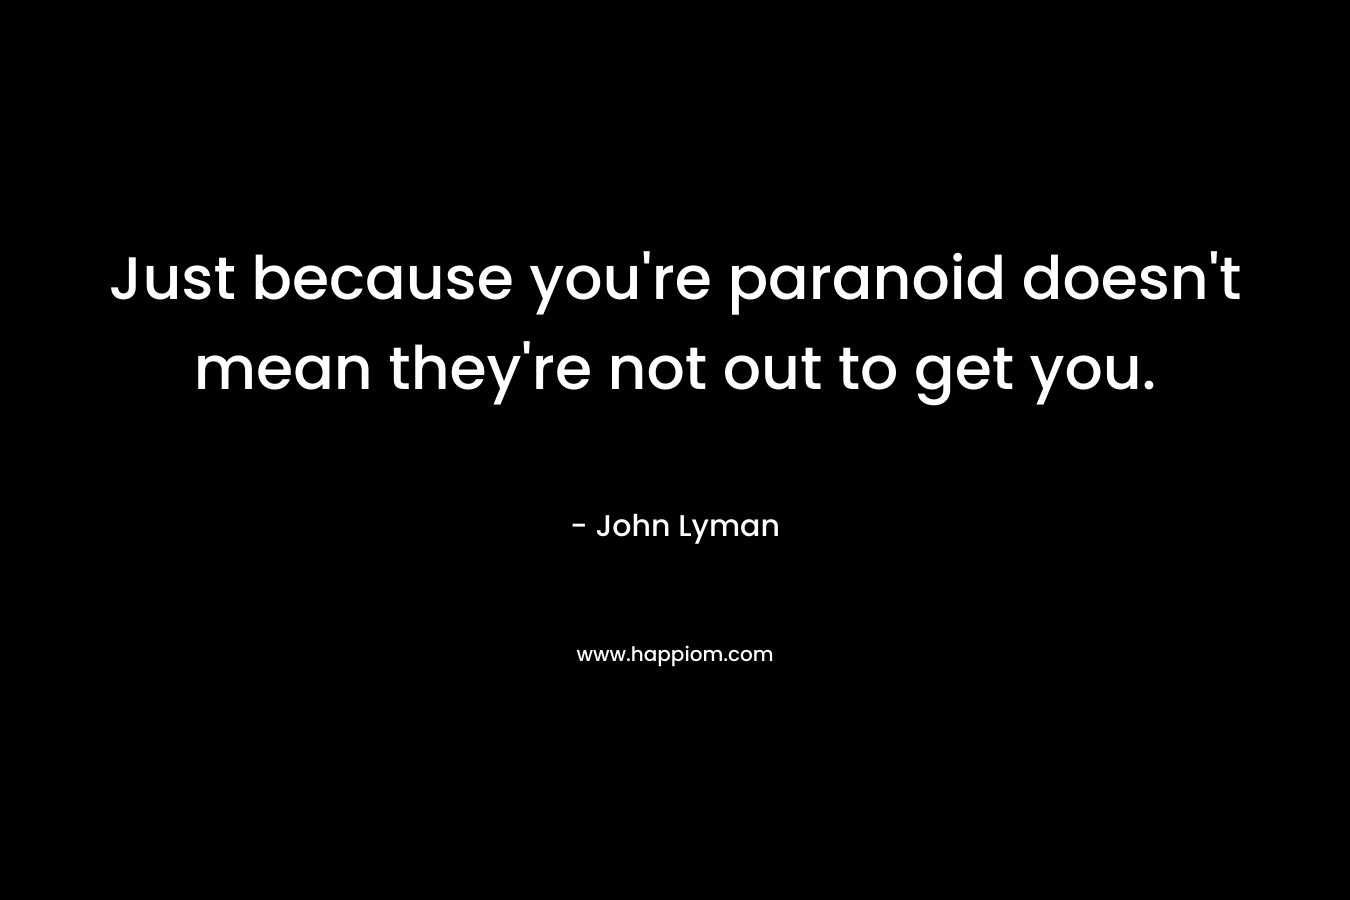 Just because you’re paranoid doesn’t mean they’re not out to get you. – John Lyman